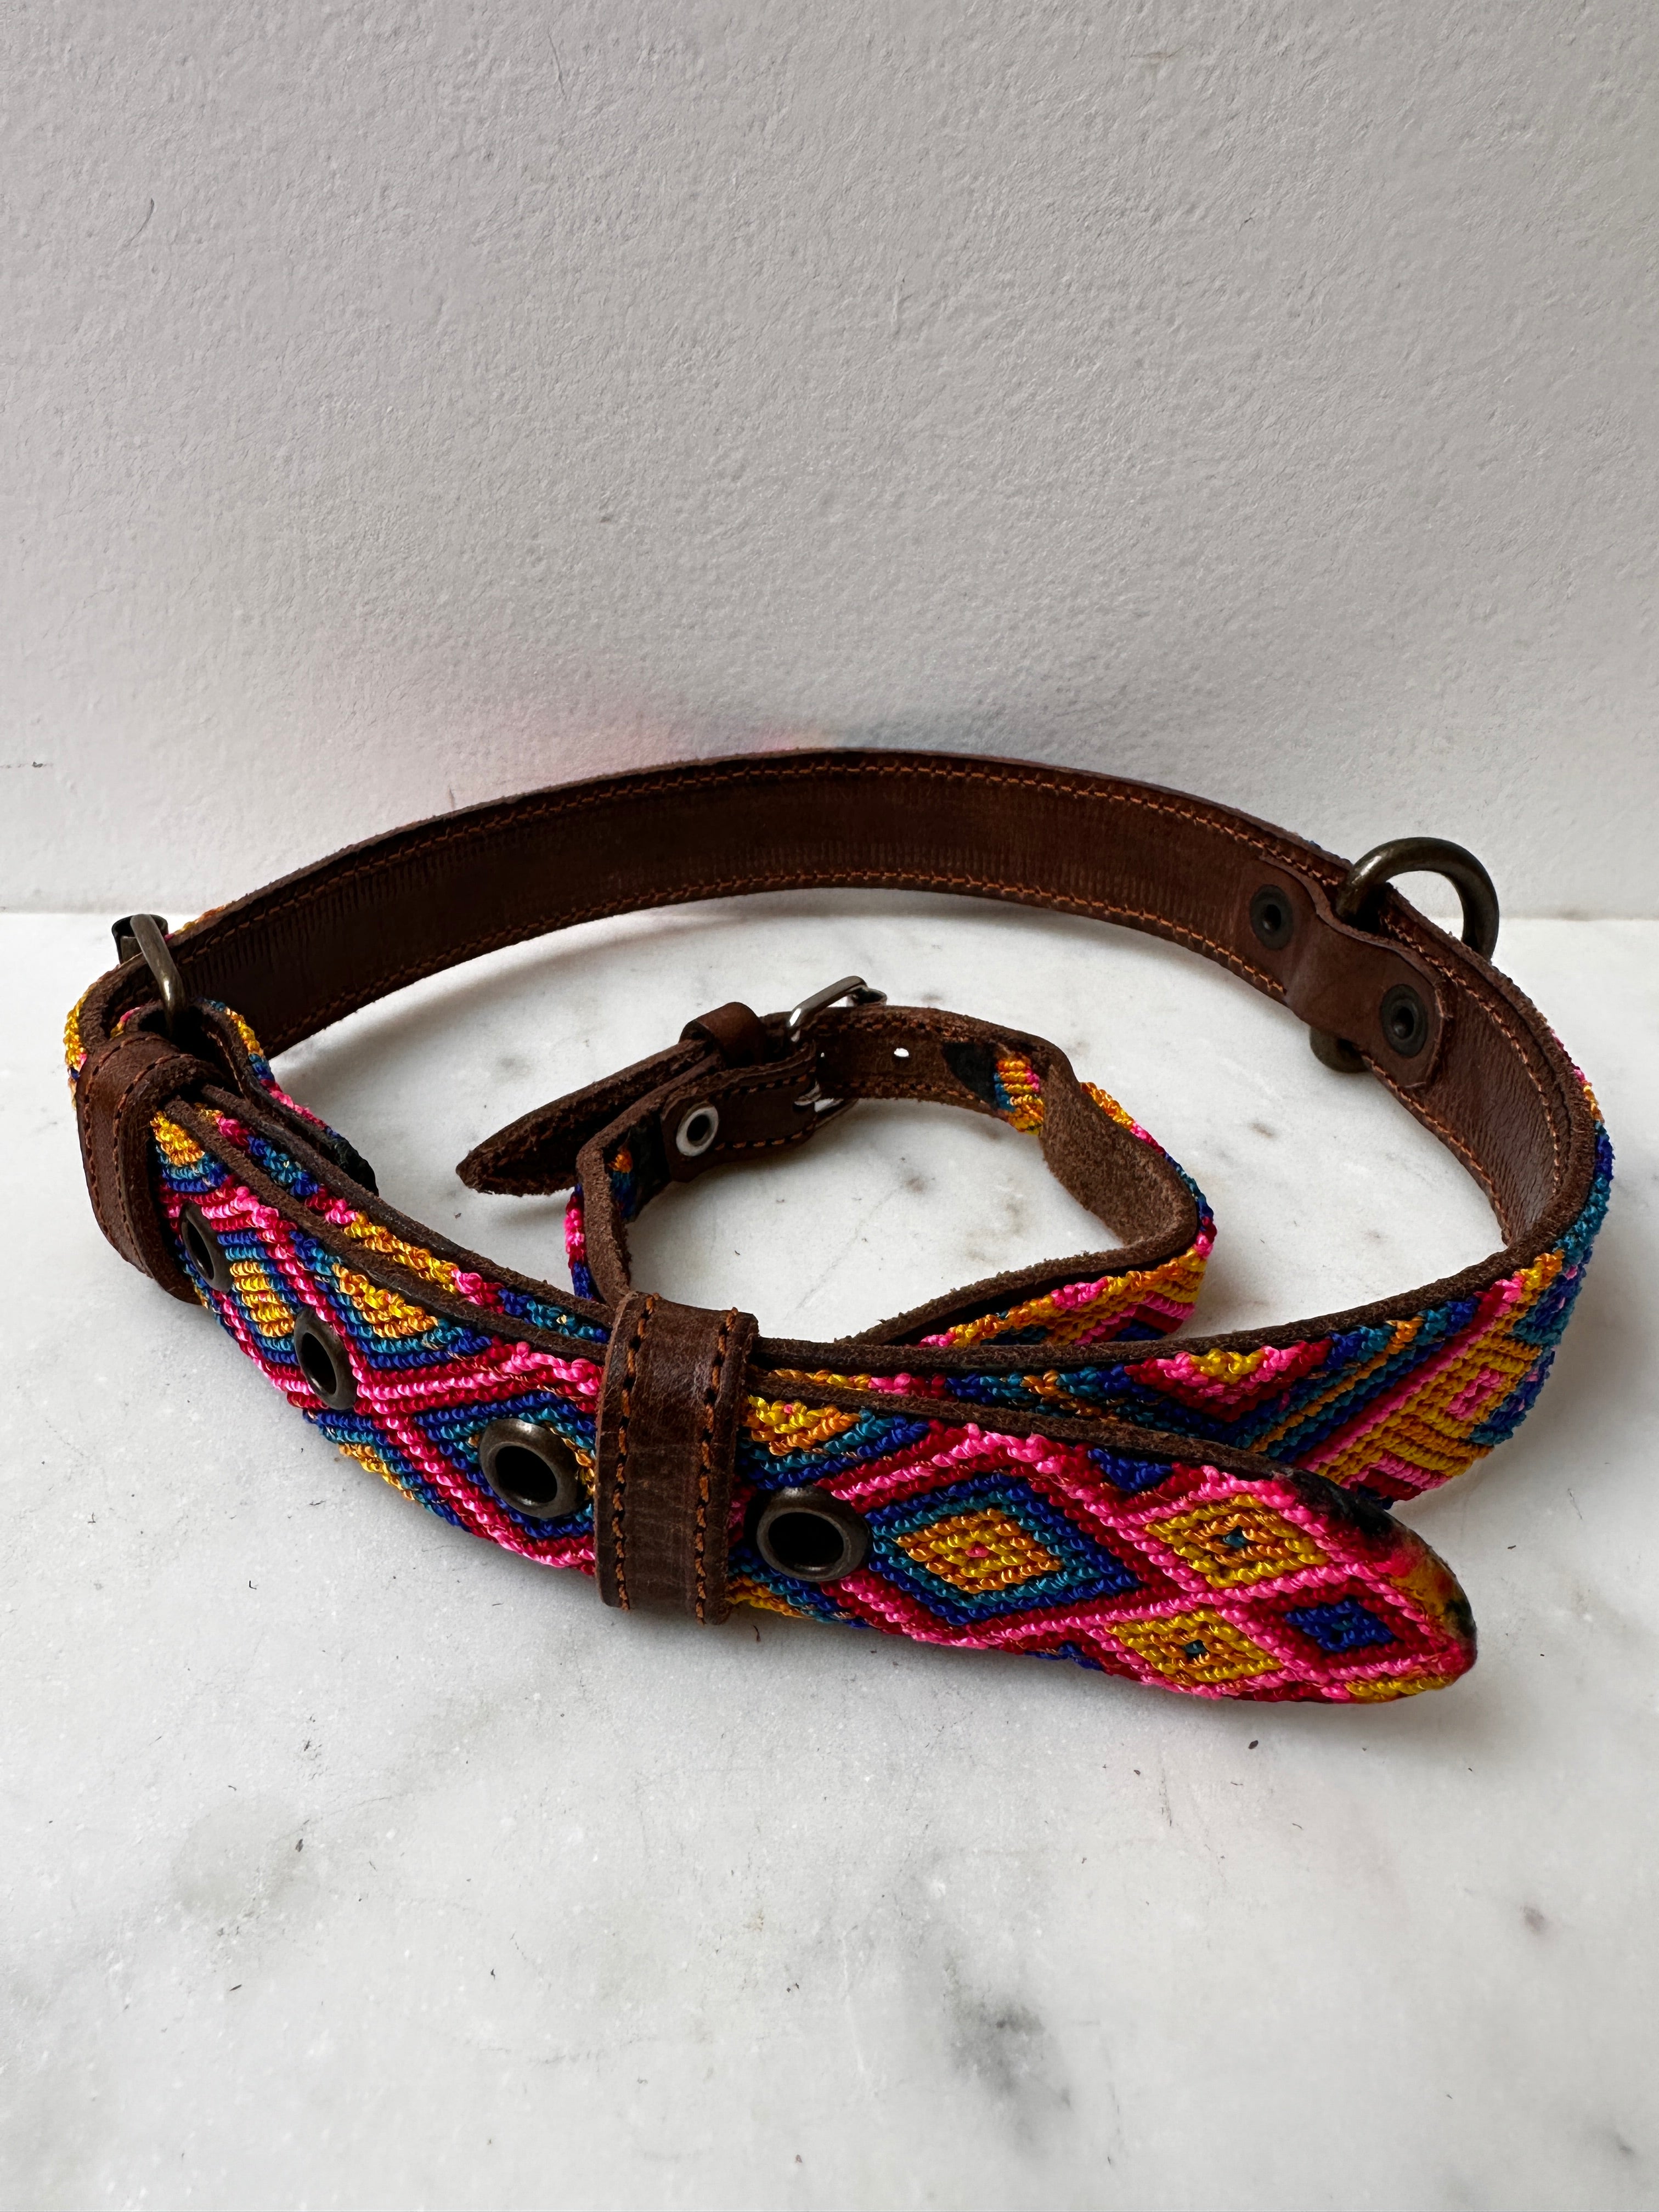 Future Nomads Homewares One Size Huichol Fully Embroidered Dog Collar L8